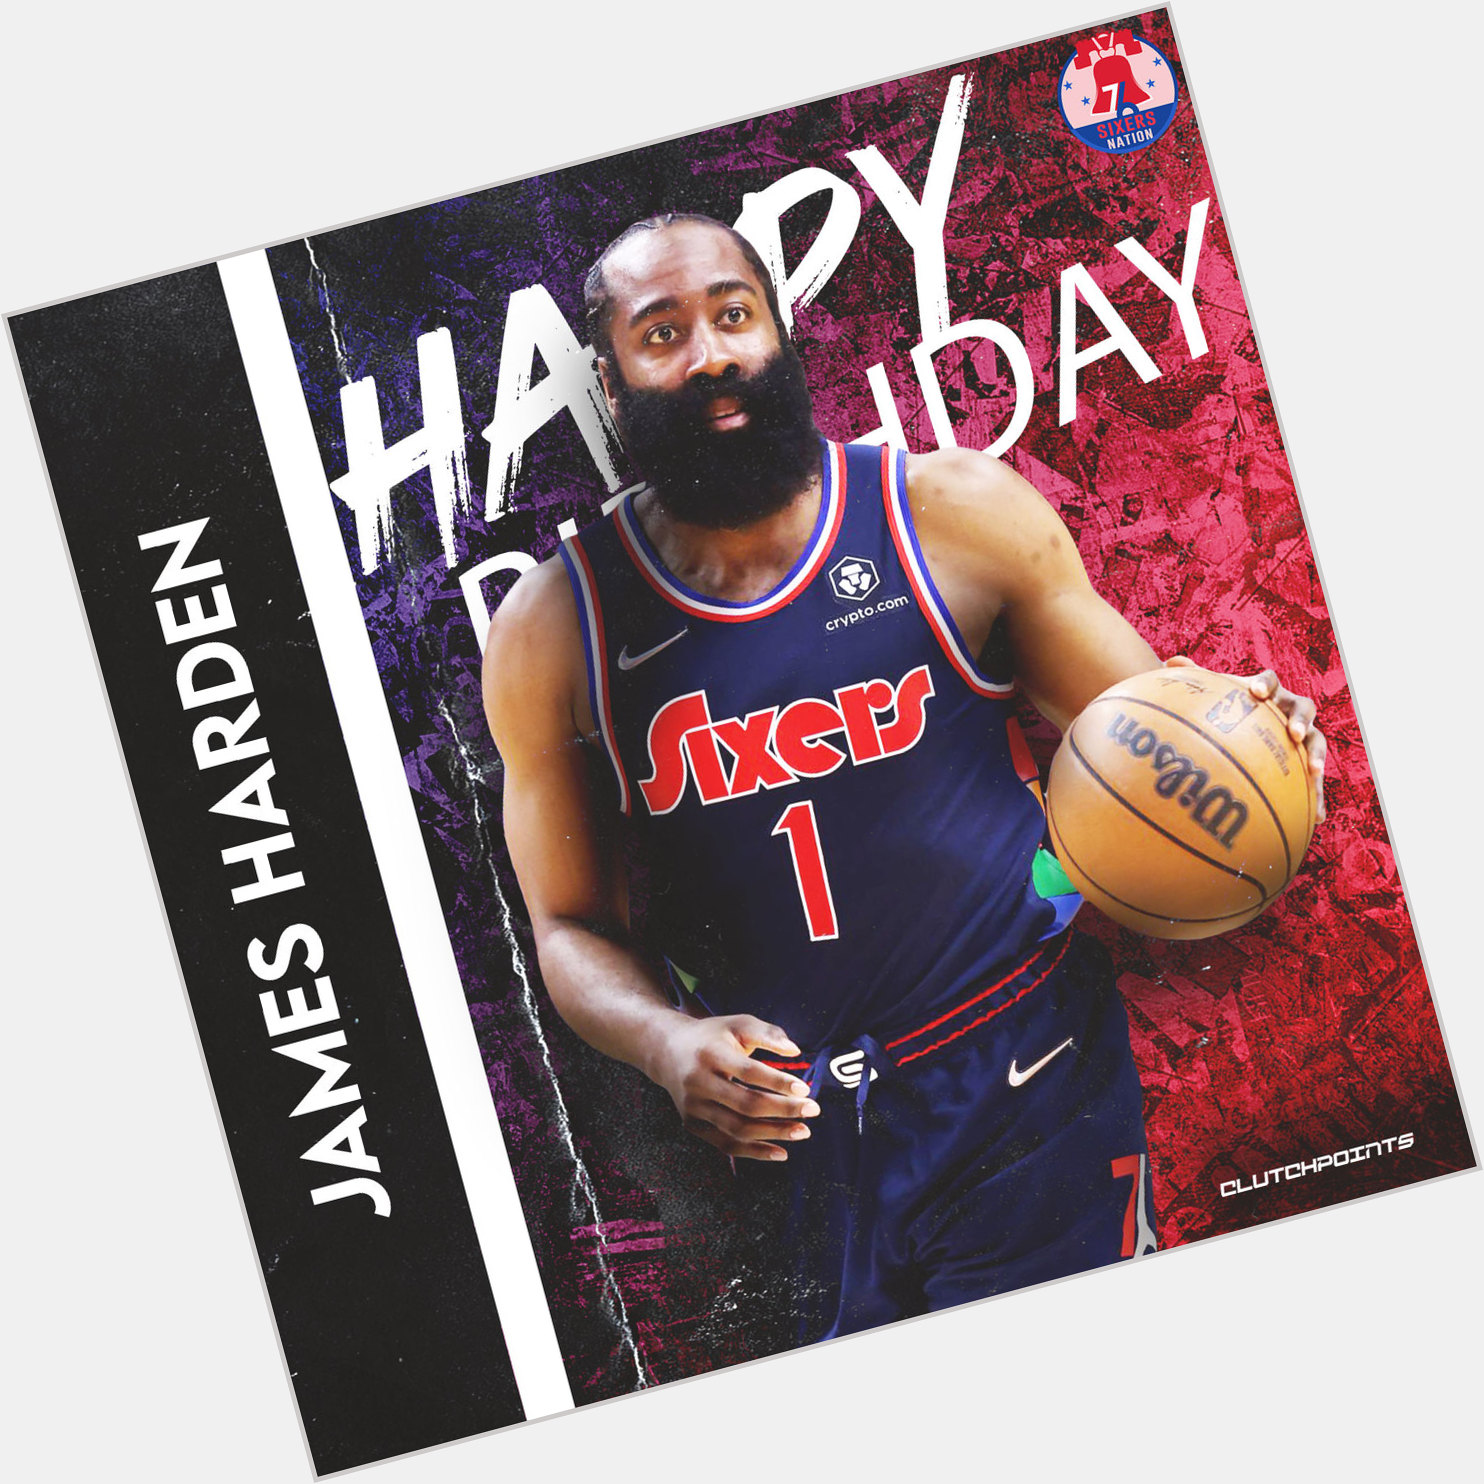 Sixers Nation, let us all wish James Harden a very happy birthday! 